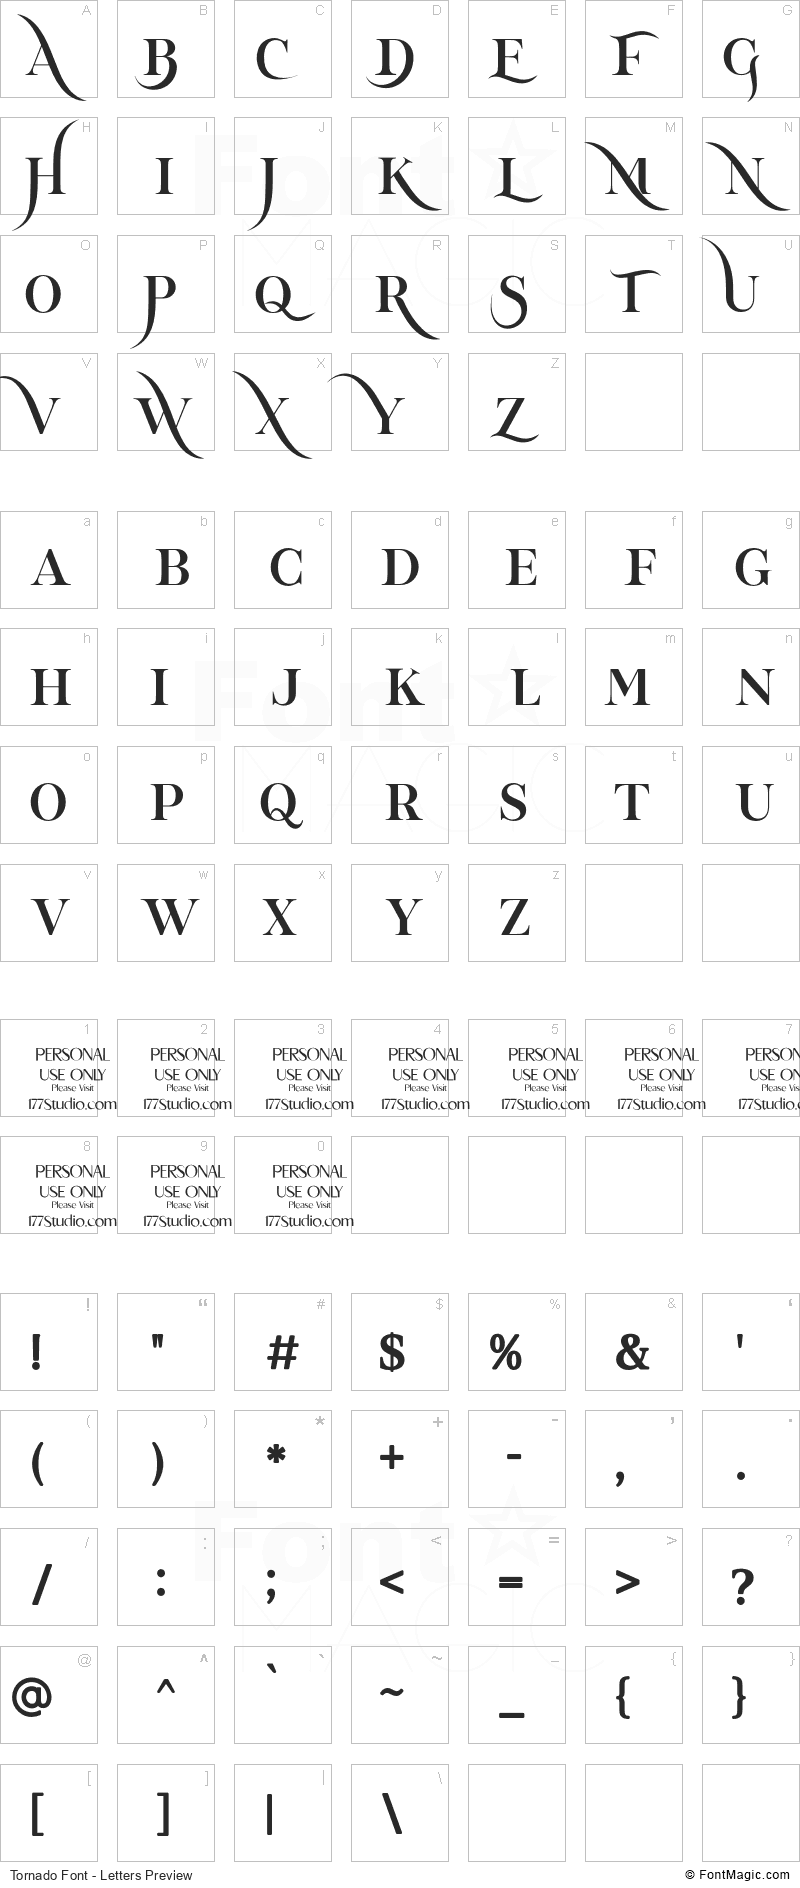 Tornado Font - All Latters Preview Chart